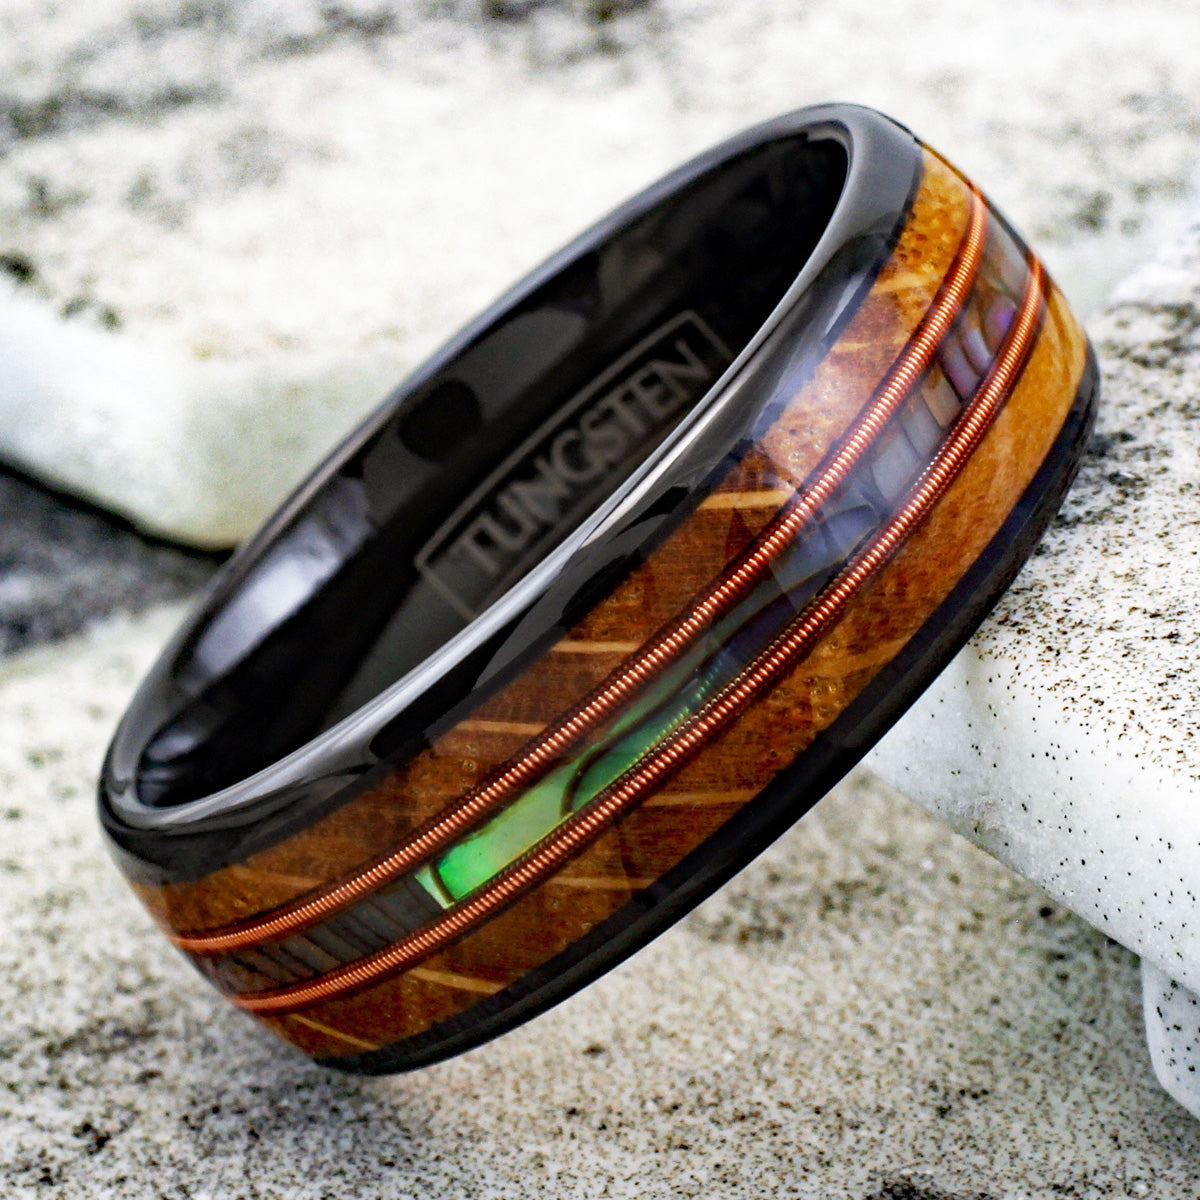 Awesome Polished Black Tungsten Low Dome Ring with Iridescent Abalone Inlay Between Two Cool Genuine Guitar String Surrounded by Whiskey Barrel Oak